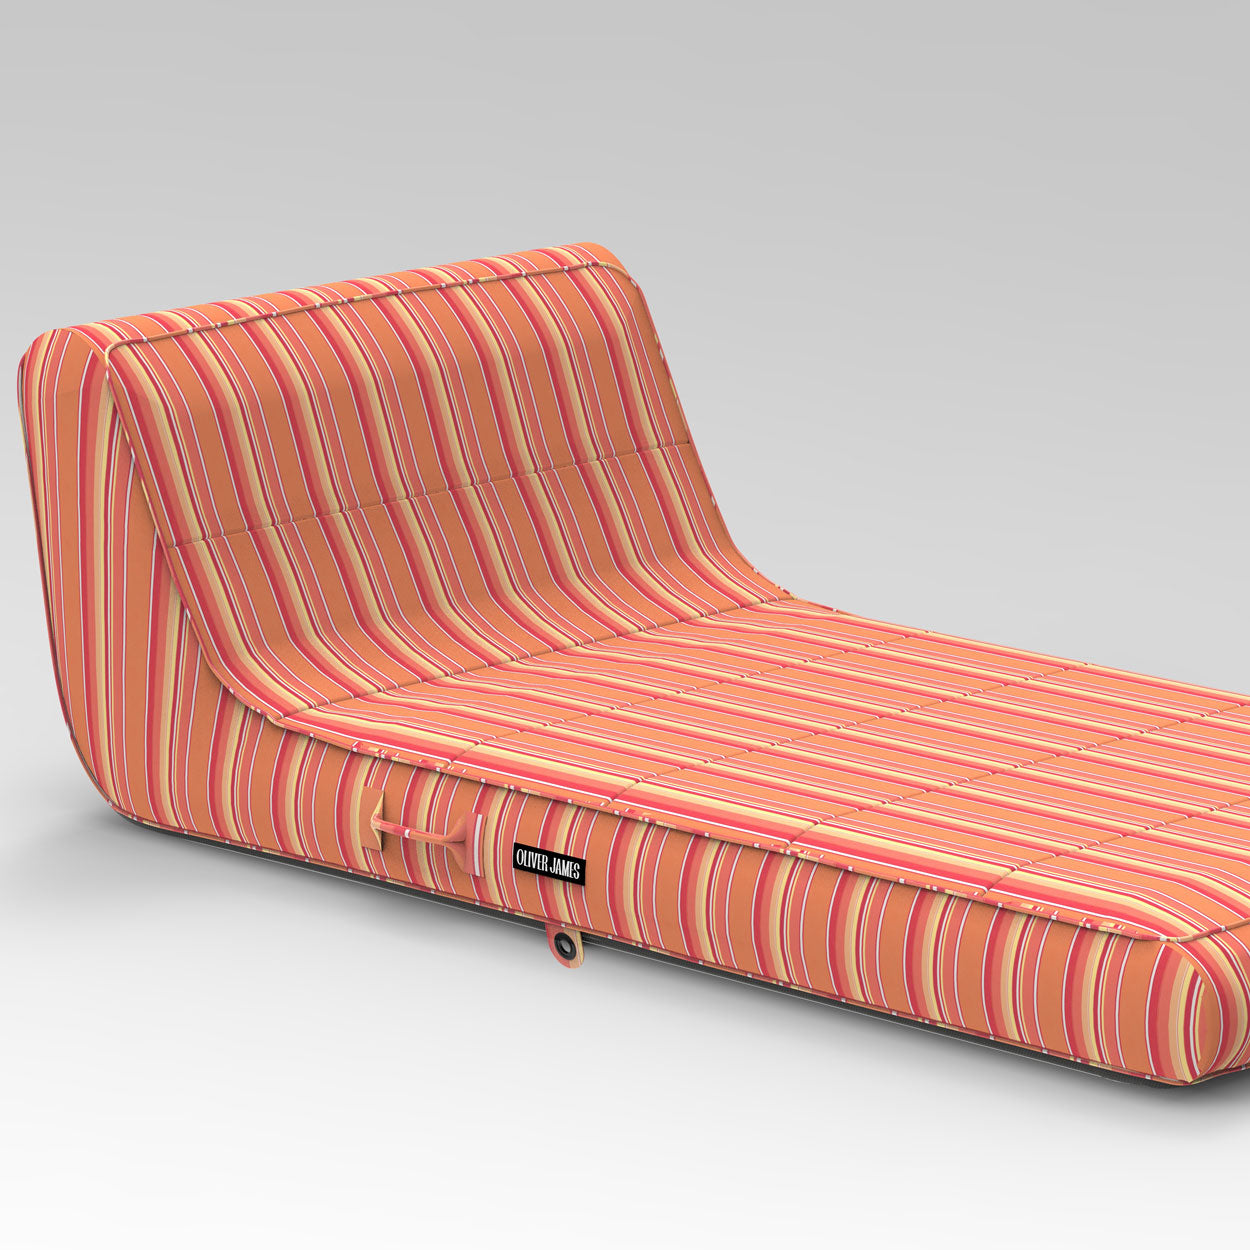 A render of an Oliver James Lilos Single in orange and white stripes.